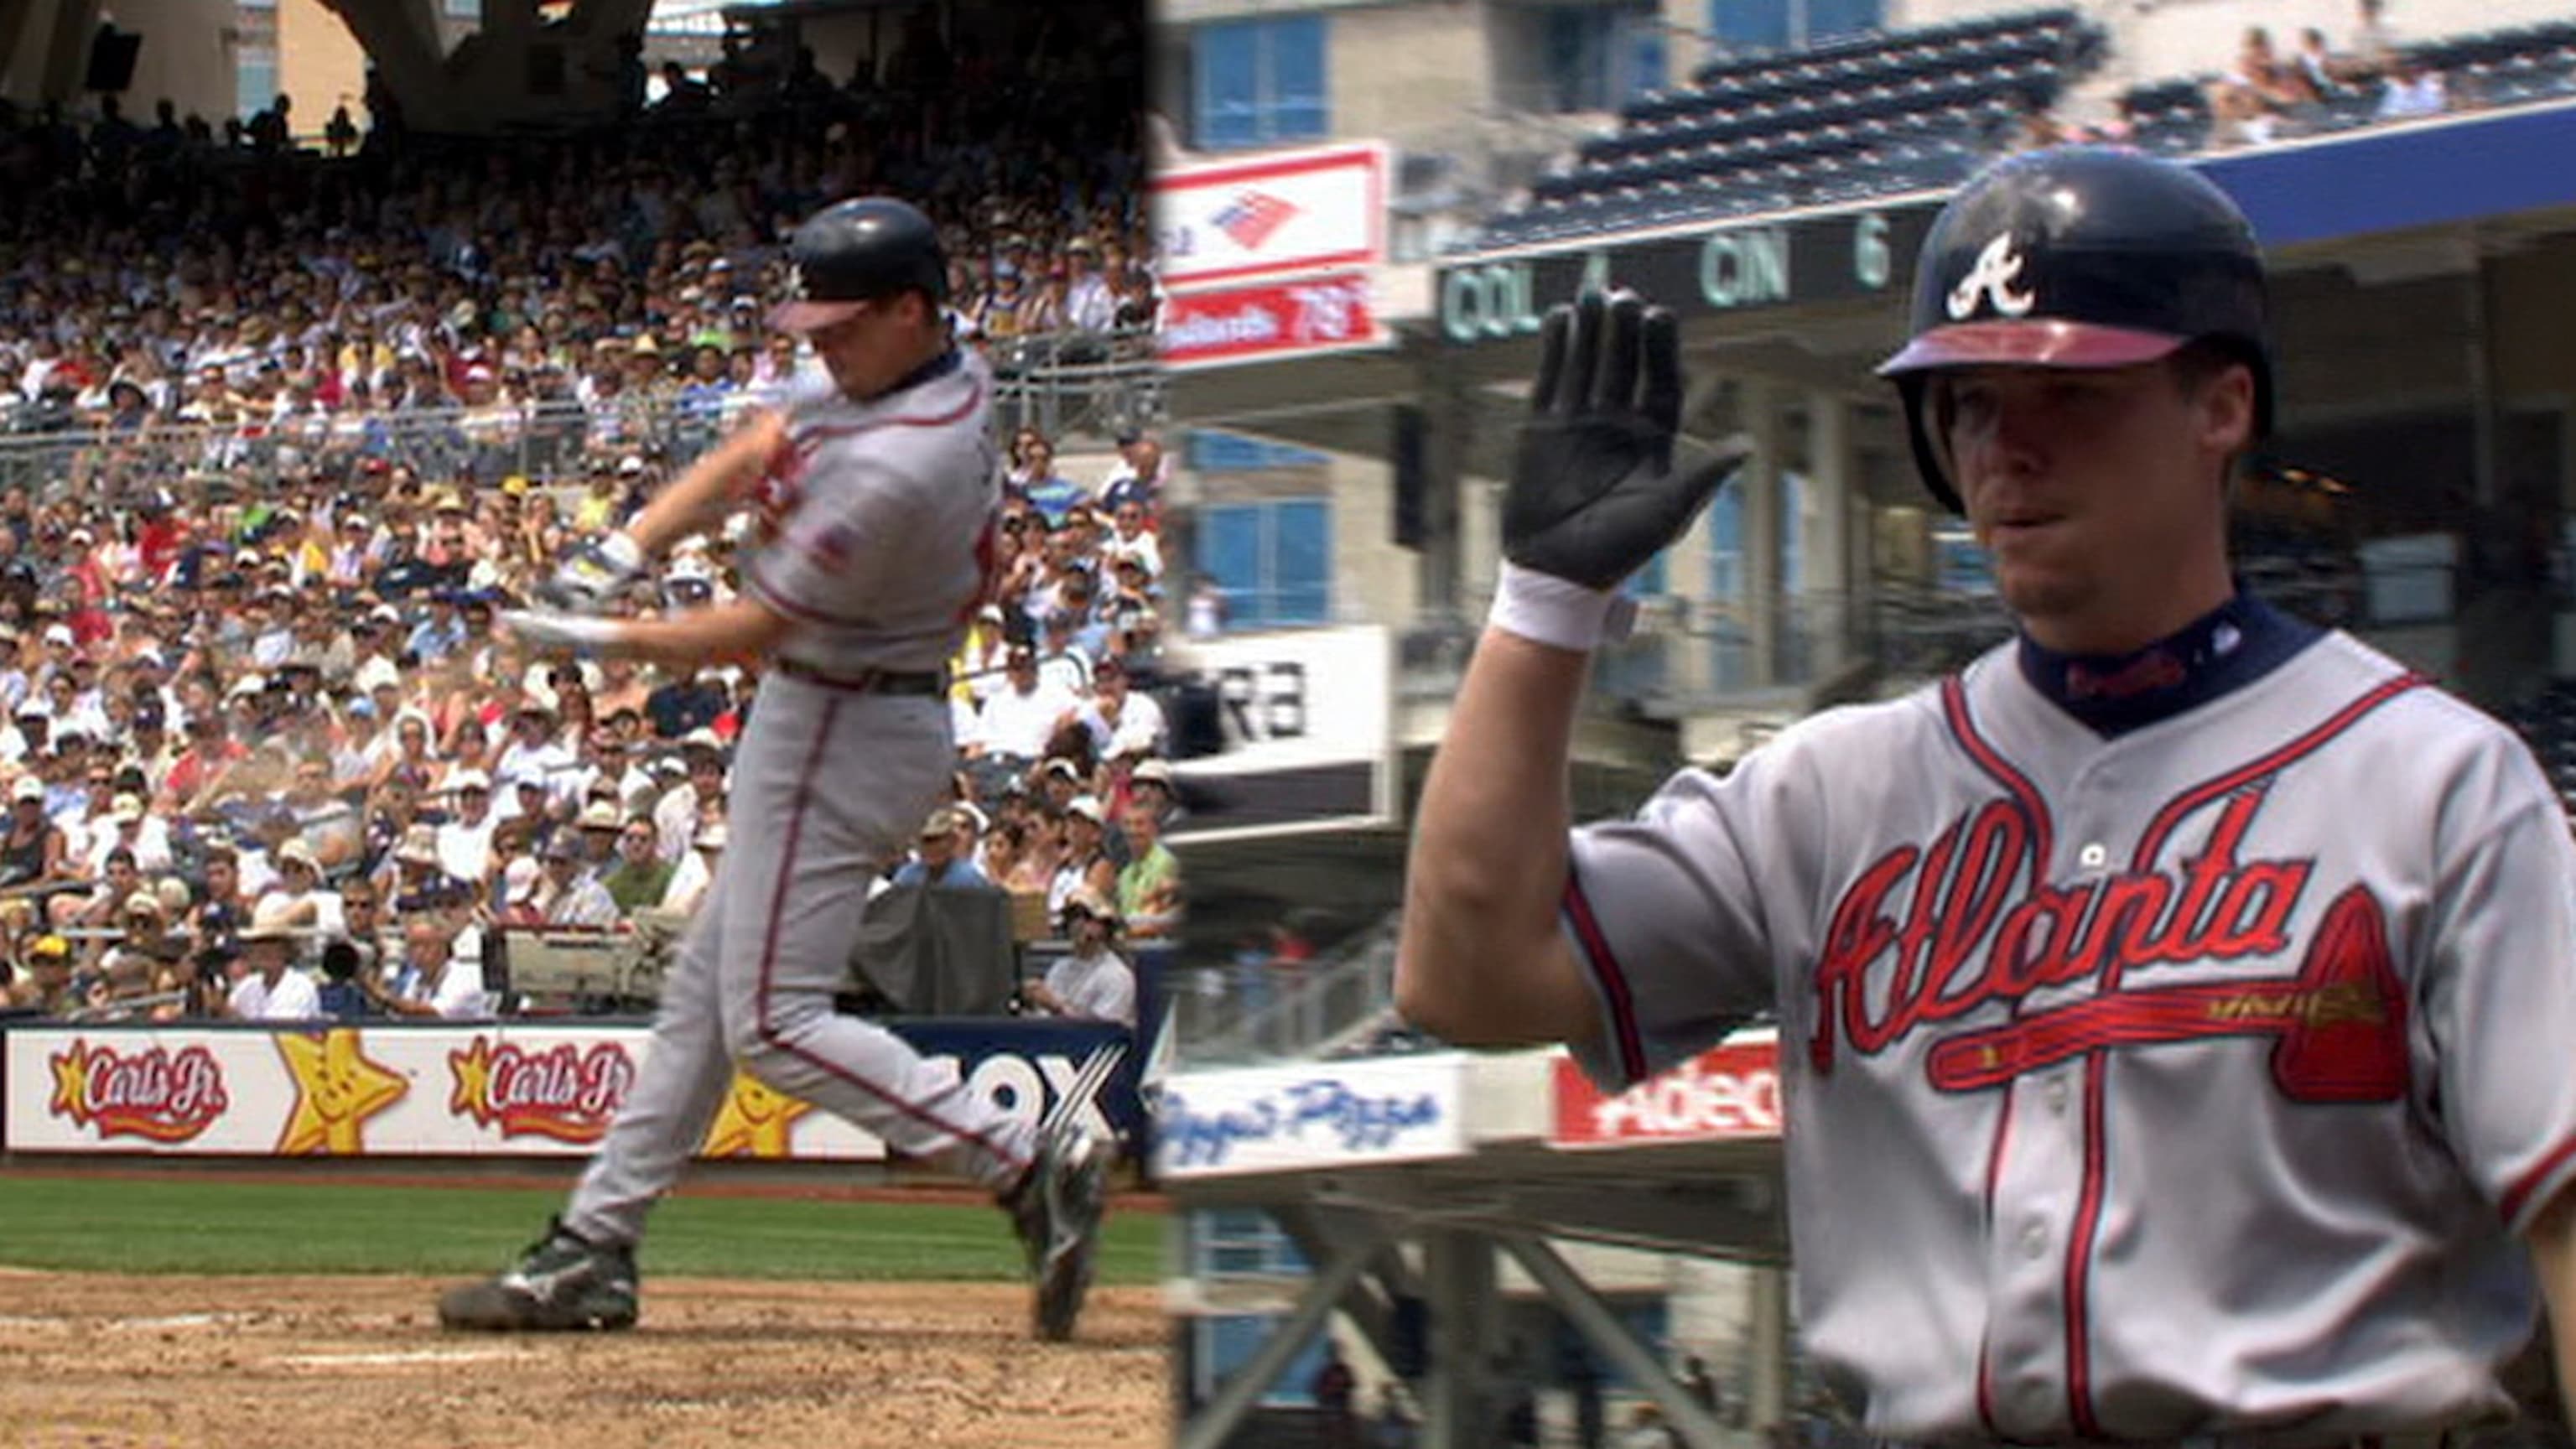 This Day in Braves History: Chipper Jones hits his 450th career